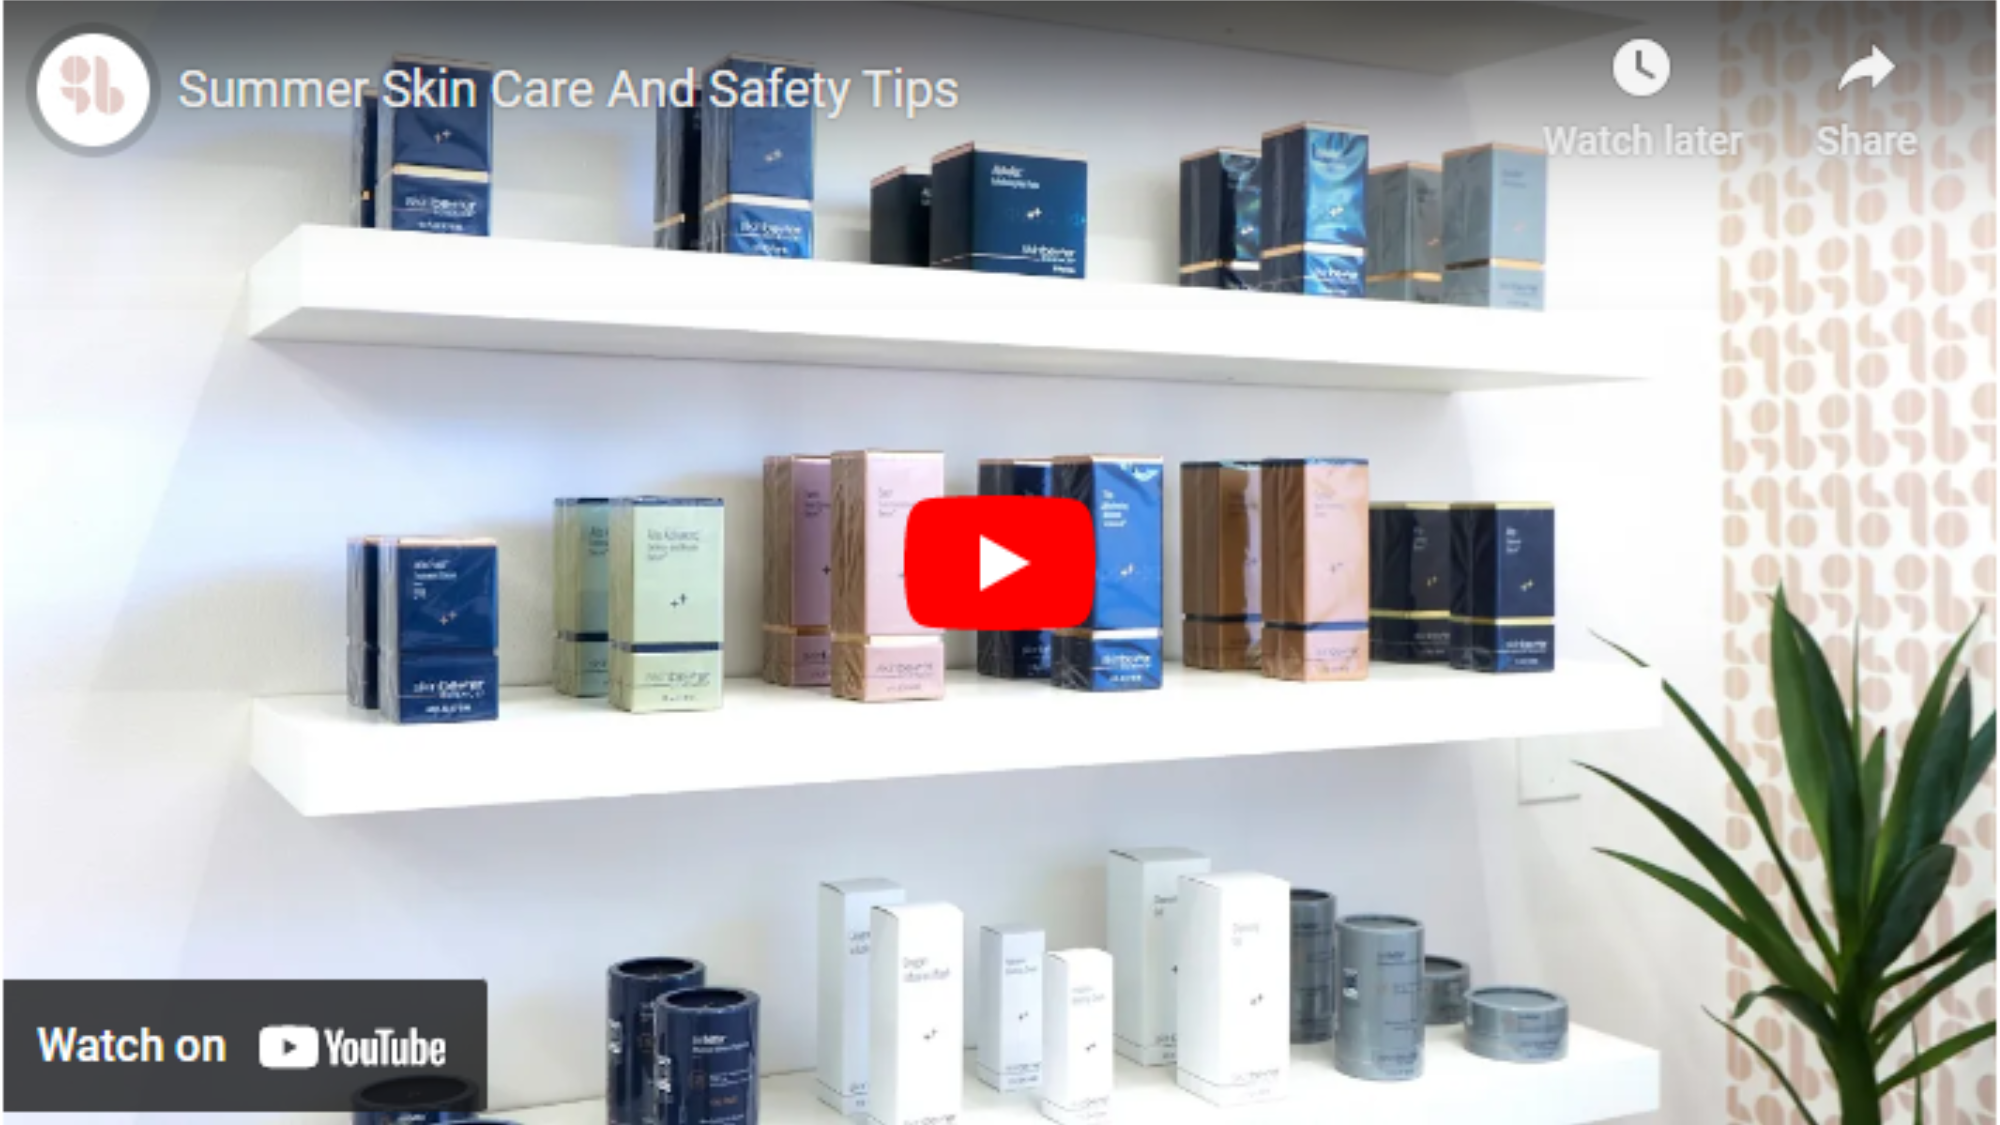 Summer Skin Care And Safety Tips